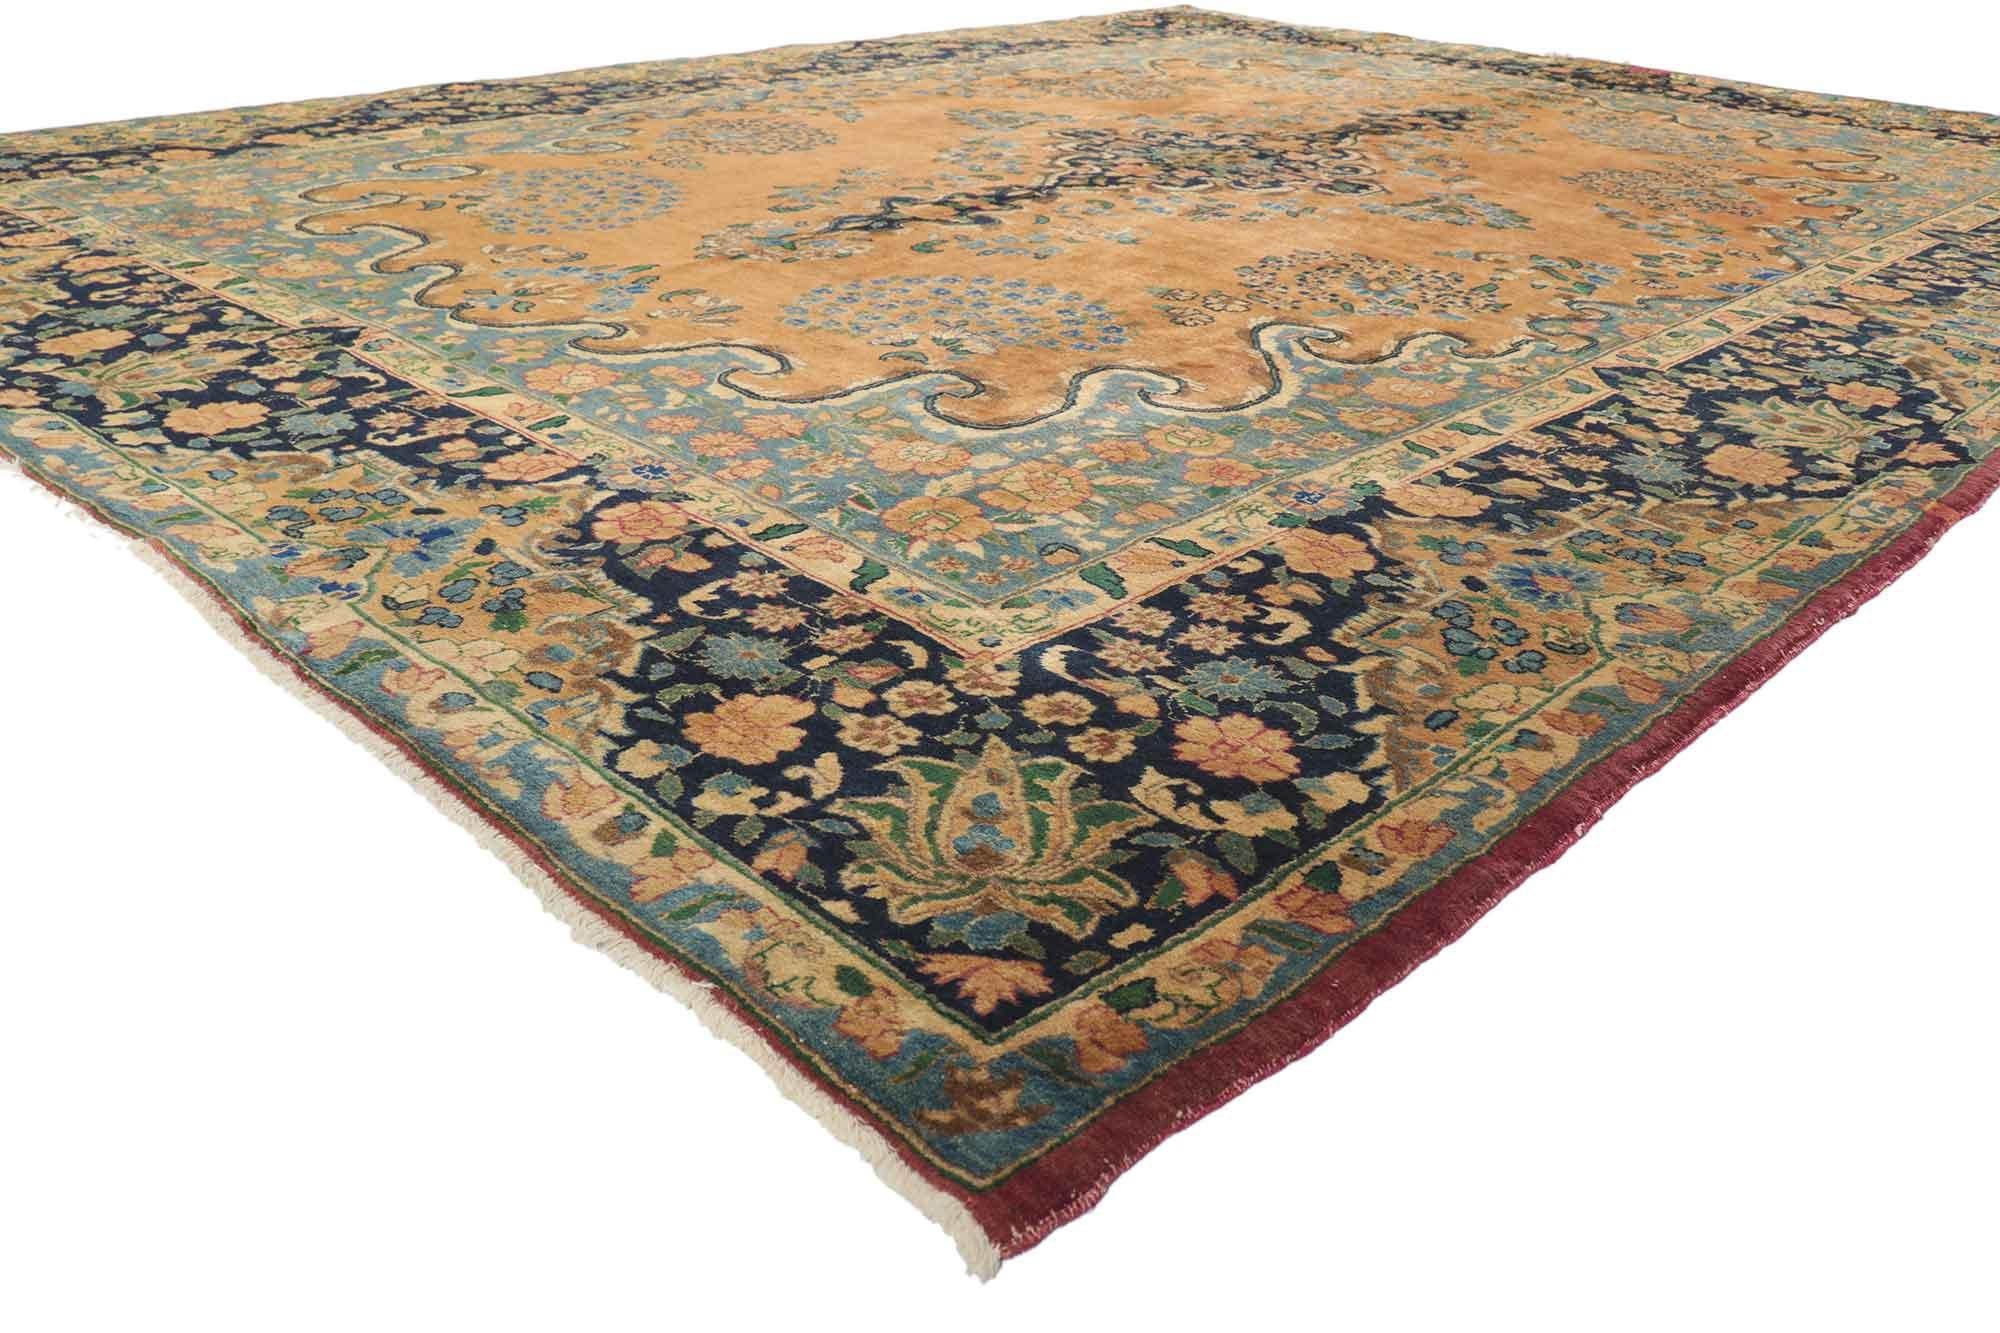 76324 Vintage Persian Mashhad Area Rug with Arabesque Baroque Regency Style. This hand-knotted wool vintage Persian Mashhad rug features a typical Mashhad medallion dotted with small blooming bouquets on an abrashed caramel-camel colored field. The